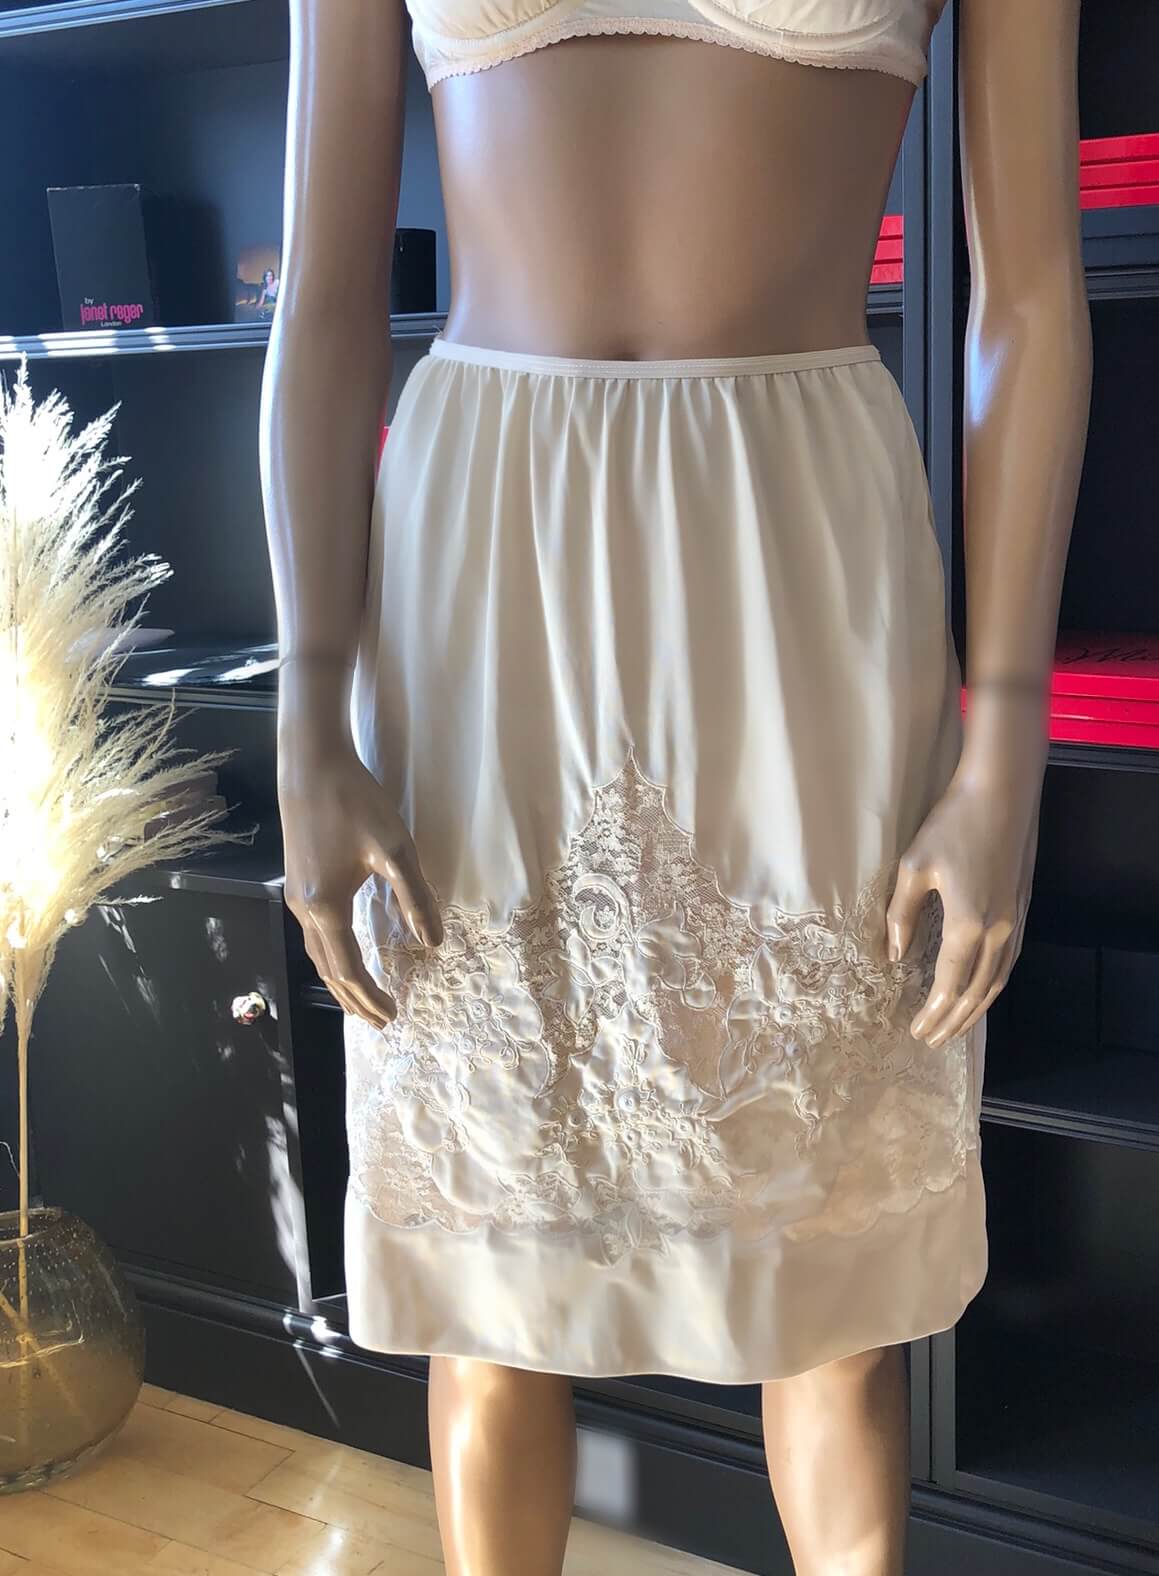 Ivory skirt with gorgeous lace panel/feature on front of skirt